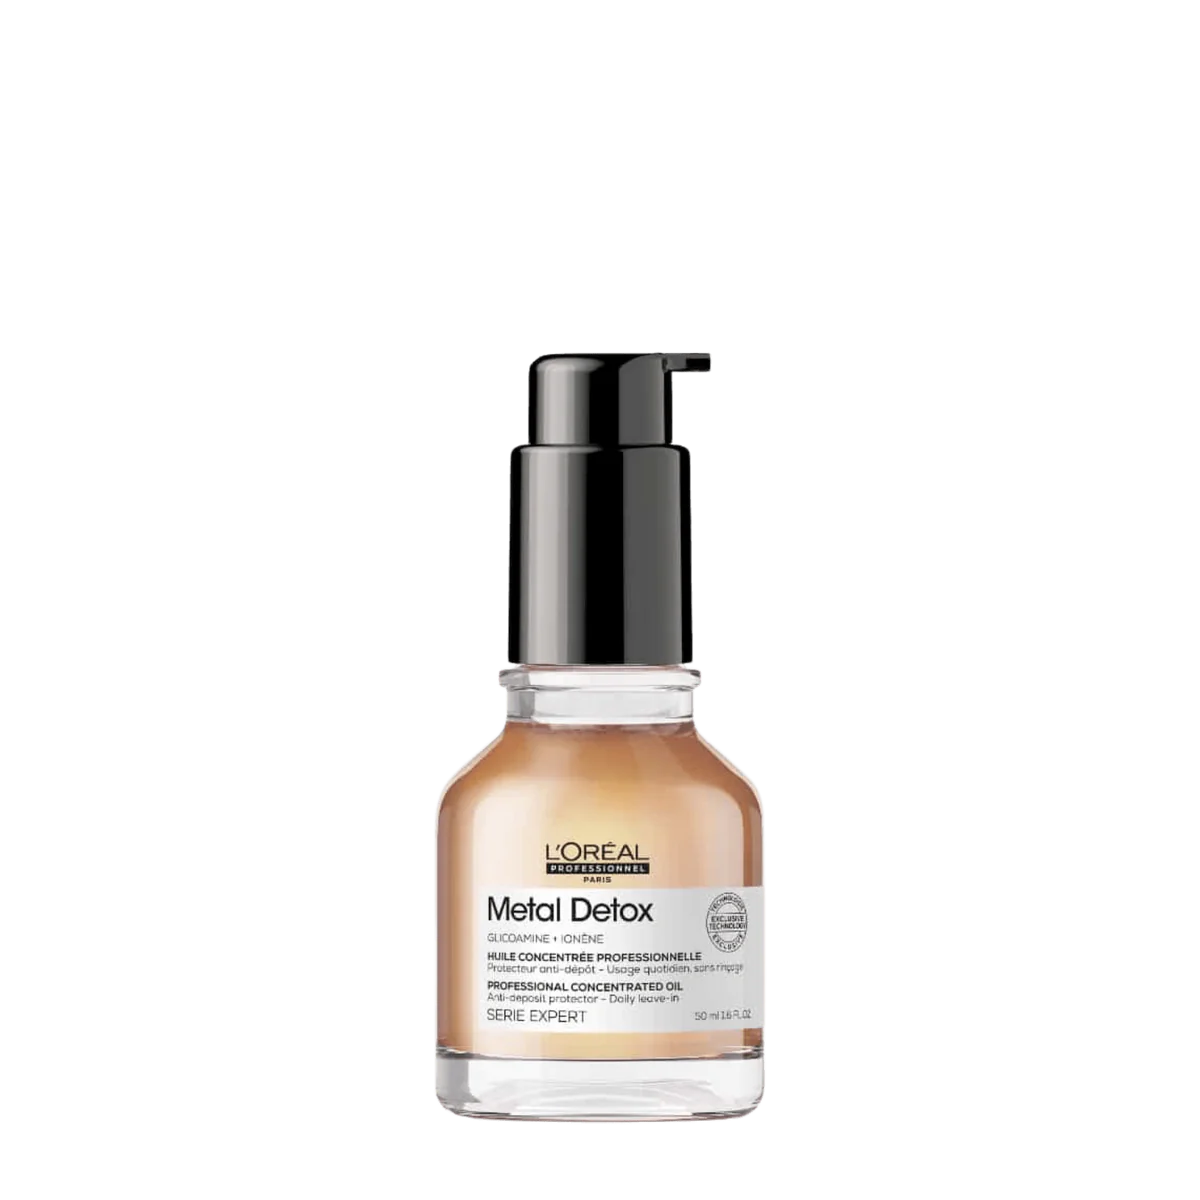 L'Oreal Série Expert Metal Detox Anti-Deposit Protector Concentrated Oil